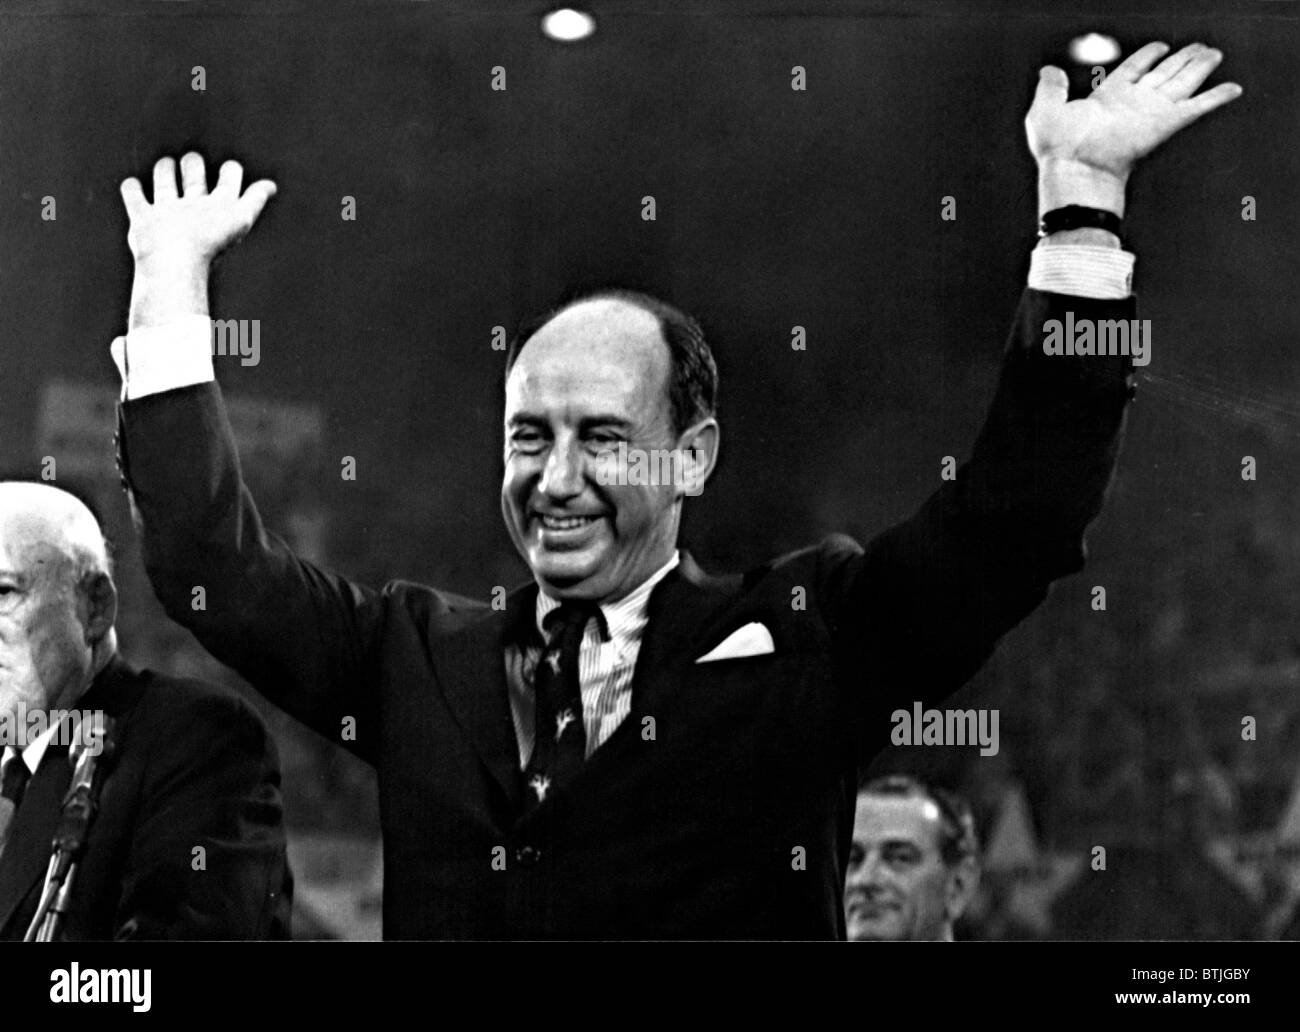 ADLAI STEVENSON, accepts the Democratic nomination to run for President. The delegates nominated him on the first ballot and the Stock Photo